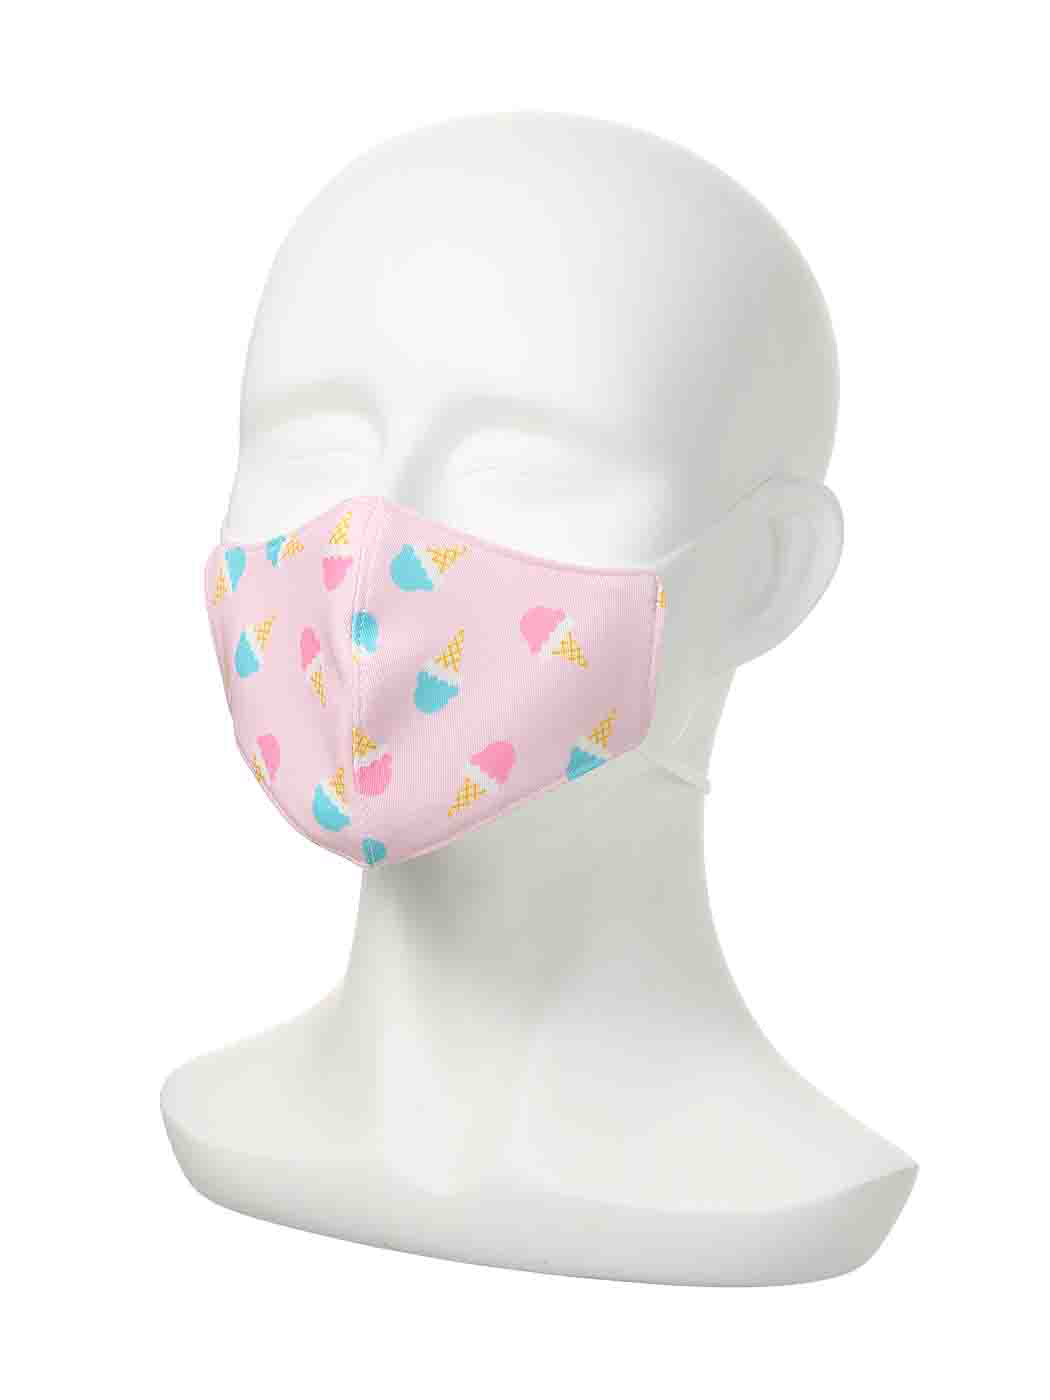 MINISO DESSERT SHOP SERIES PRINTED FACE MASK FOR KIDS (ICE CREAM) 2010516111105 MOUTH MASK